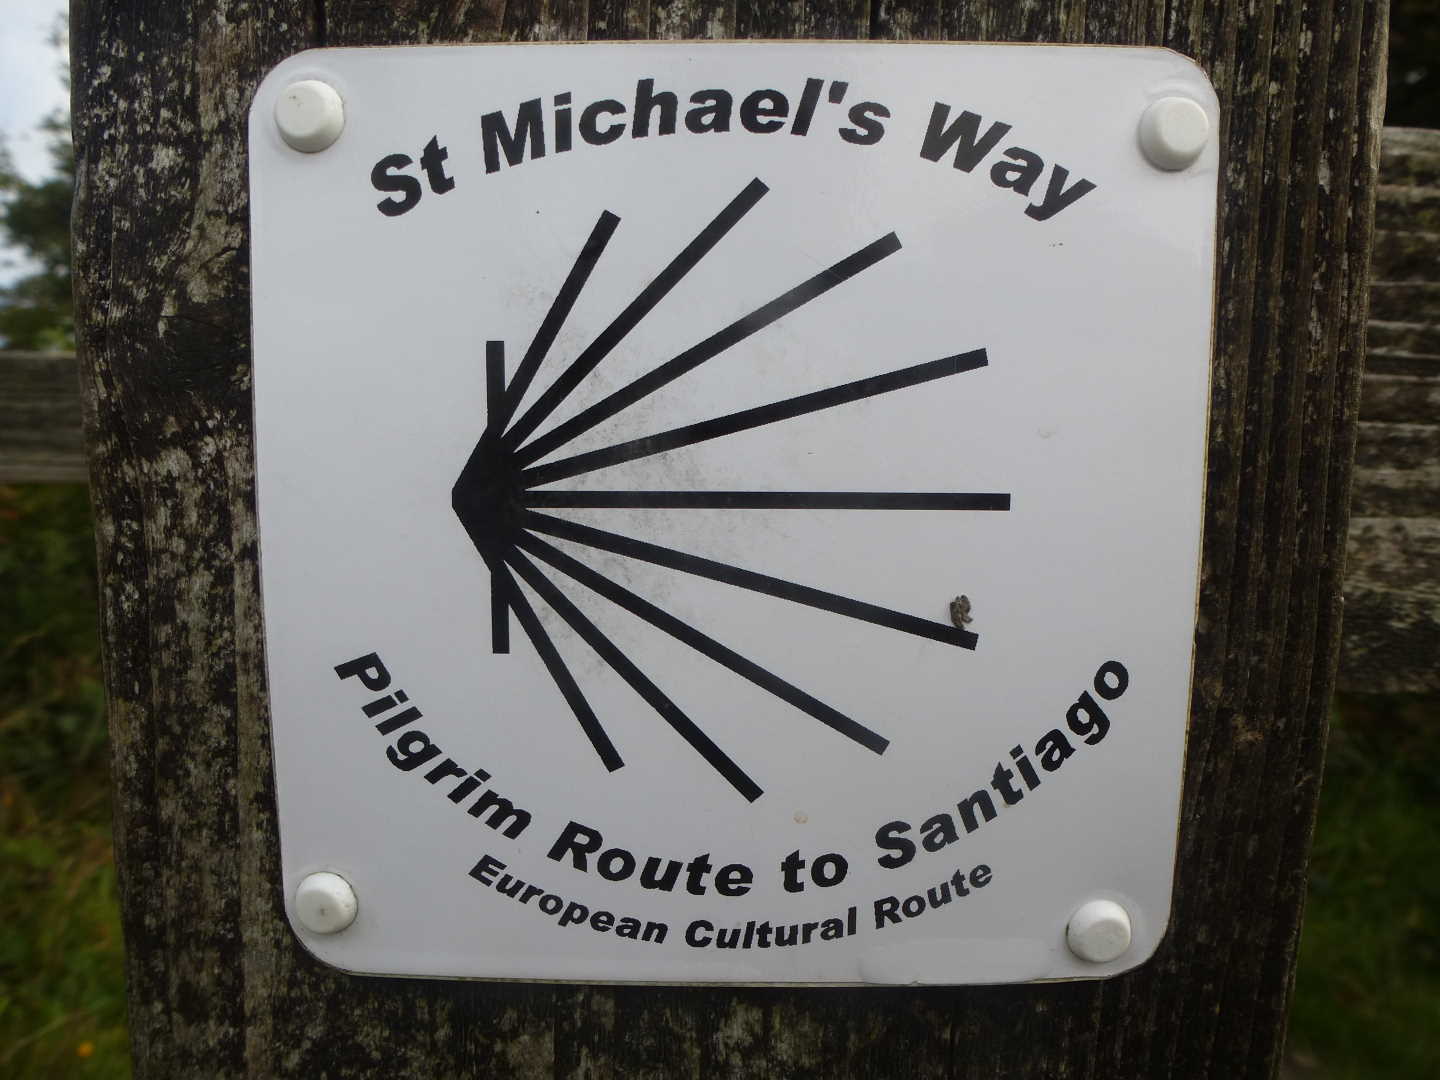 A sign for St. Michaels Way